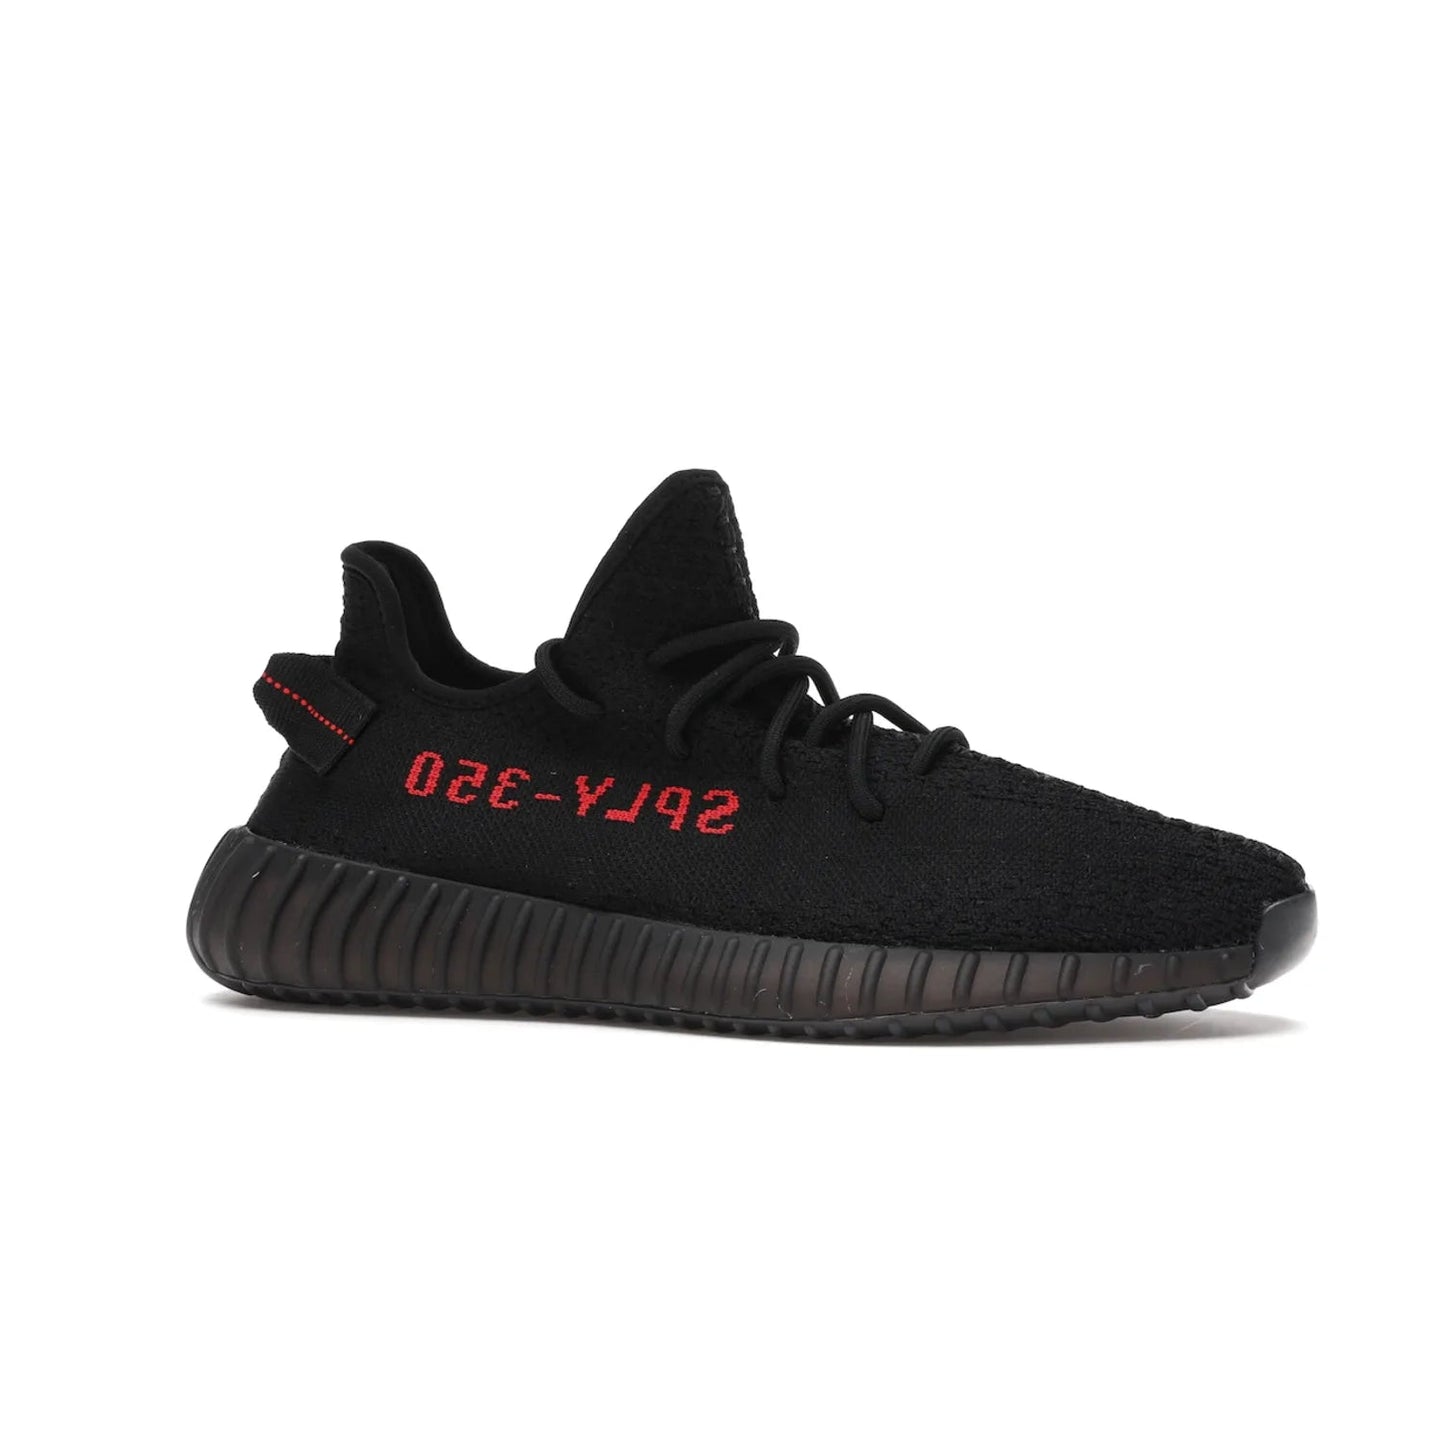 adidas Yeezy Boost 350 V2 Black Red (2017/2020) - Image 3 - Only at www.BallersClubKickz.com - Adidas Yeezy Boost 350 V2 Black Red: a classic colorway featuring black Primeknit upper, BOOST cushioning system, and iconic "SPLY-350" text. Released in 2017 for a retail price of $220.